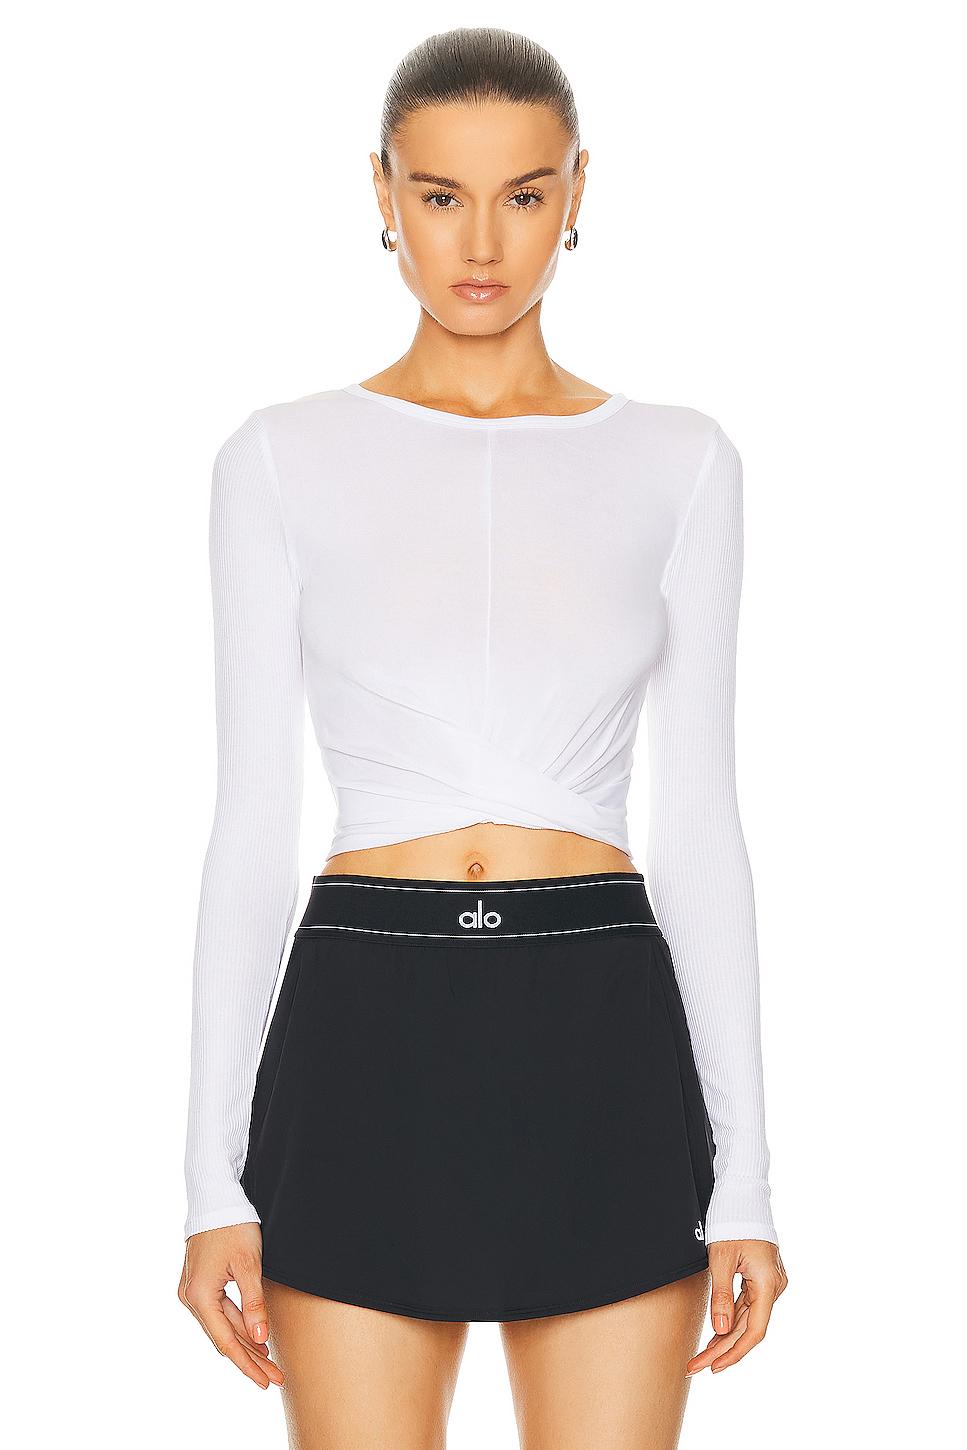 Alo Yoga Cover Long Sleeve Top in White